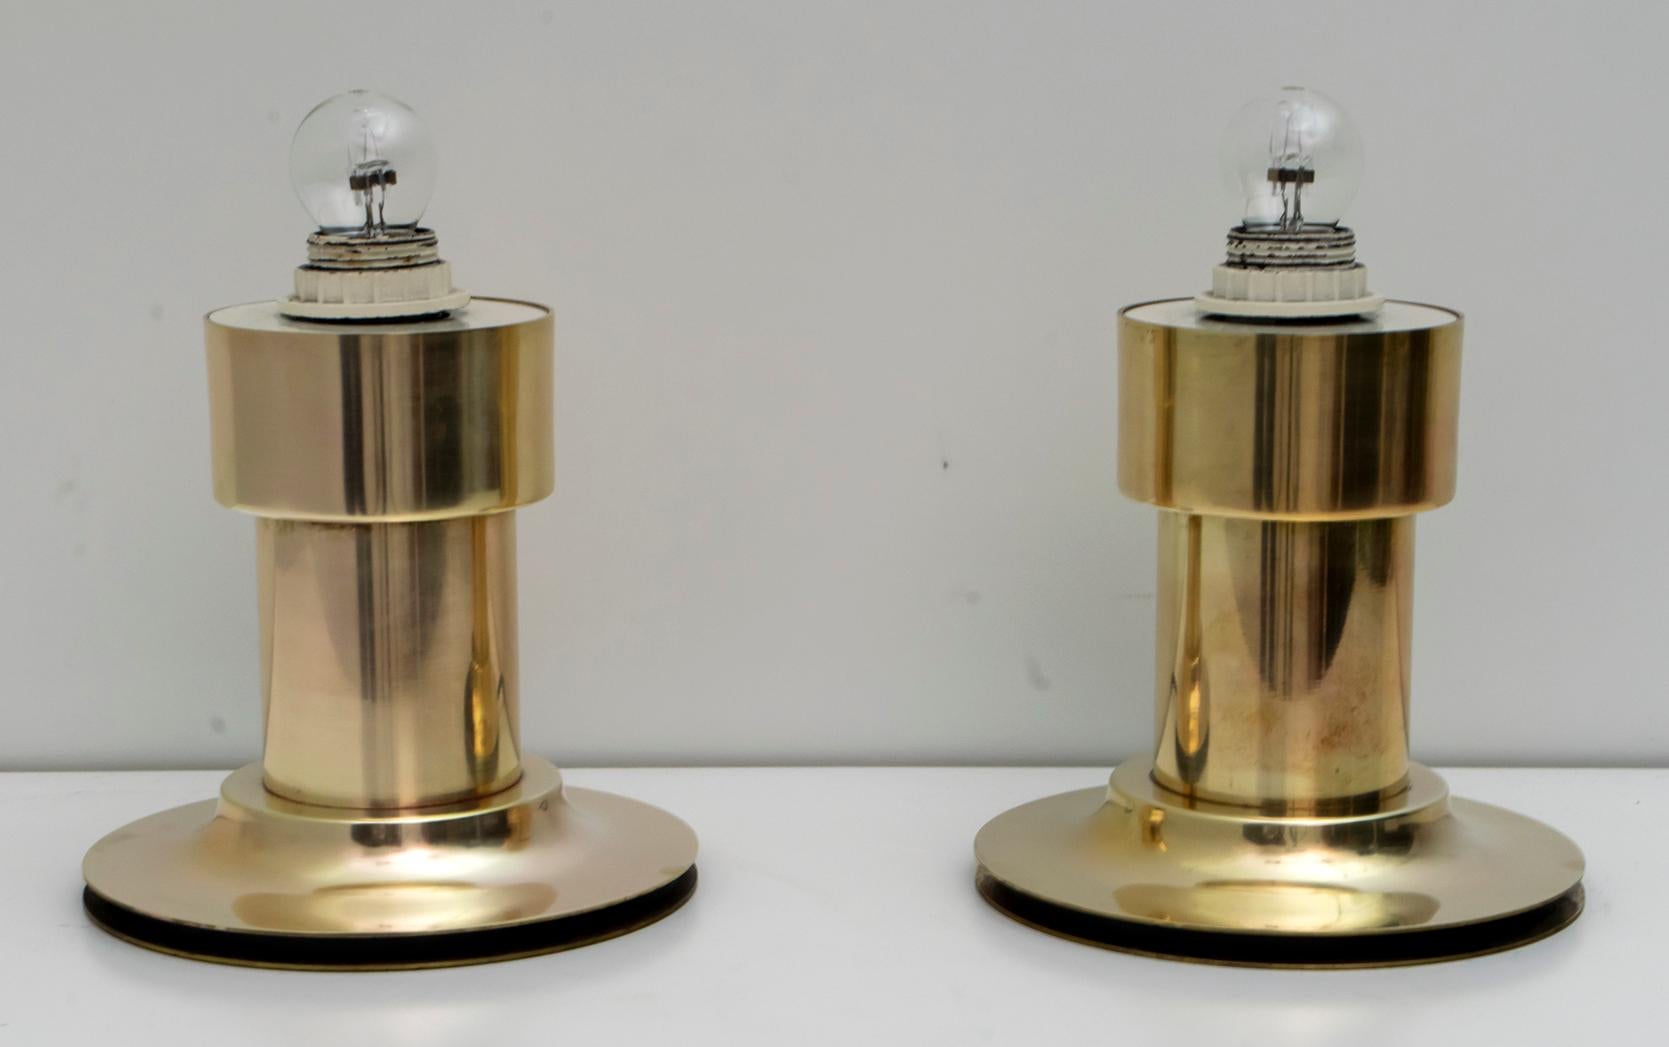 This pair of cylindrical table lamps are made of solid brass and excellent workmanship.